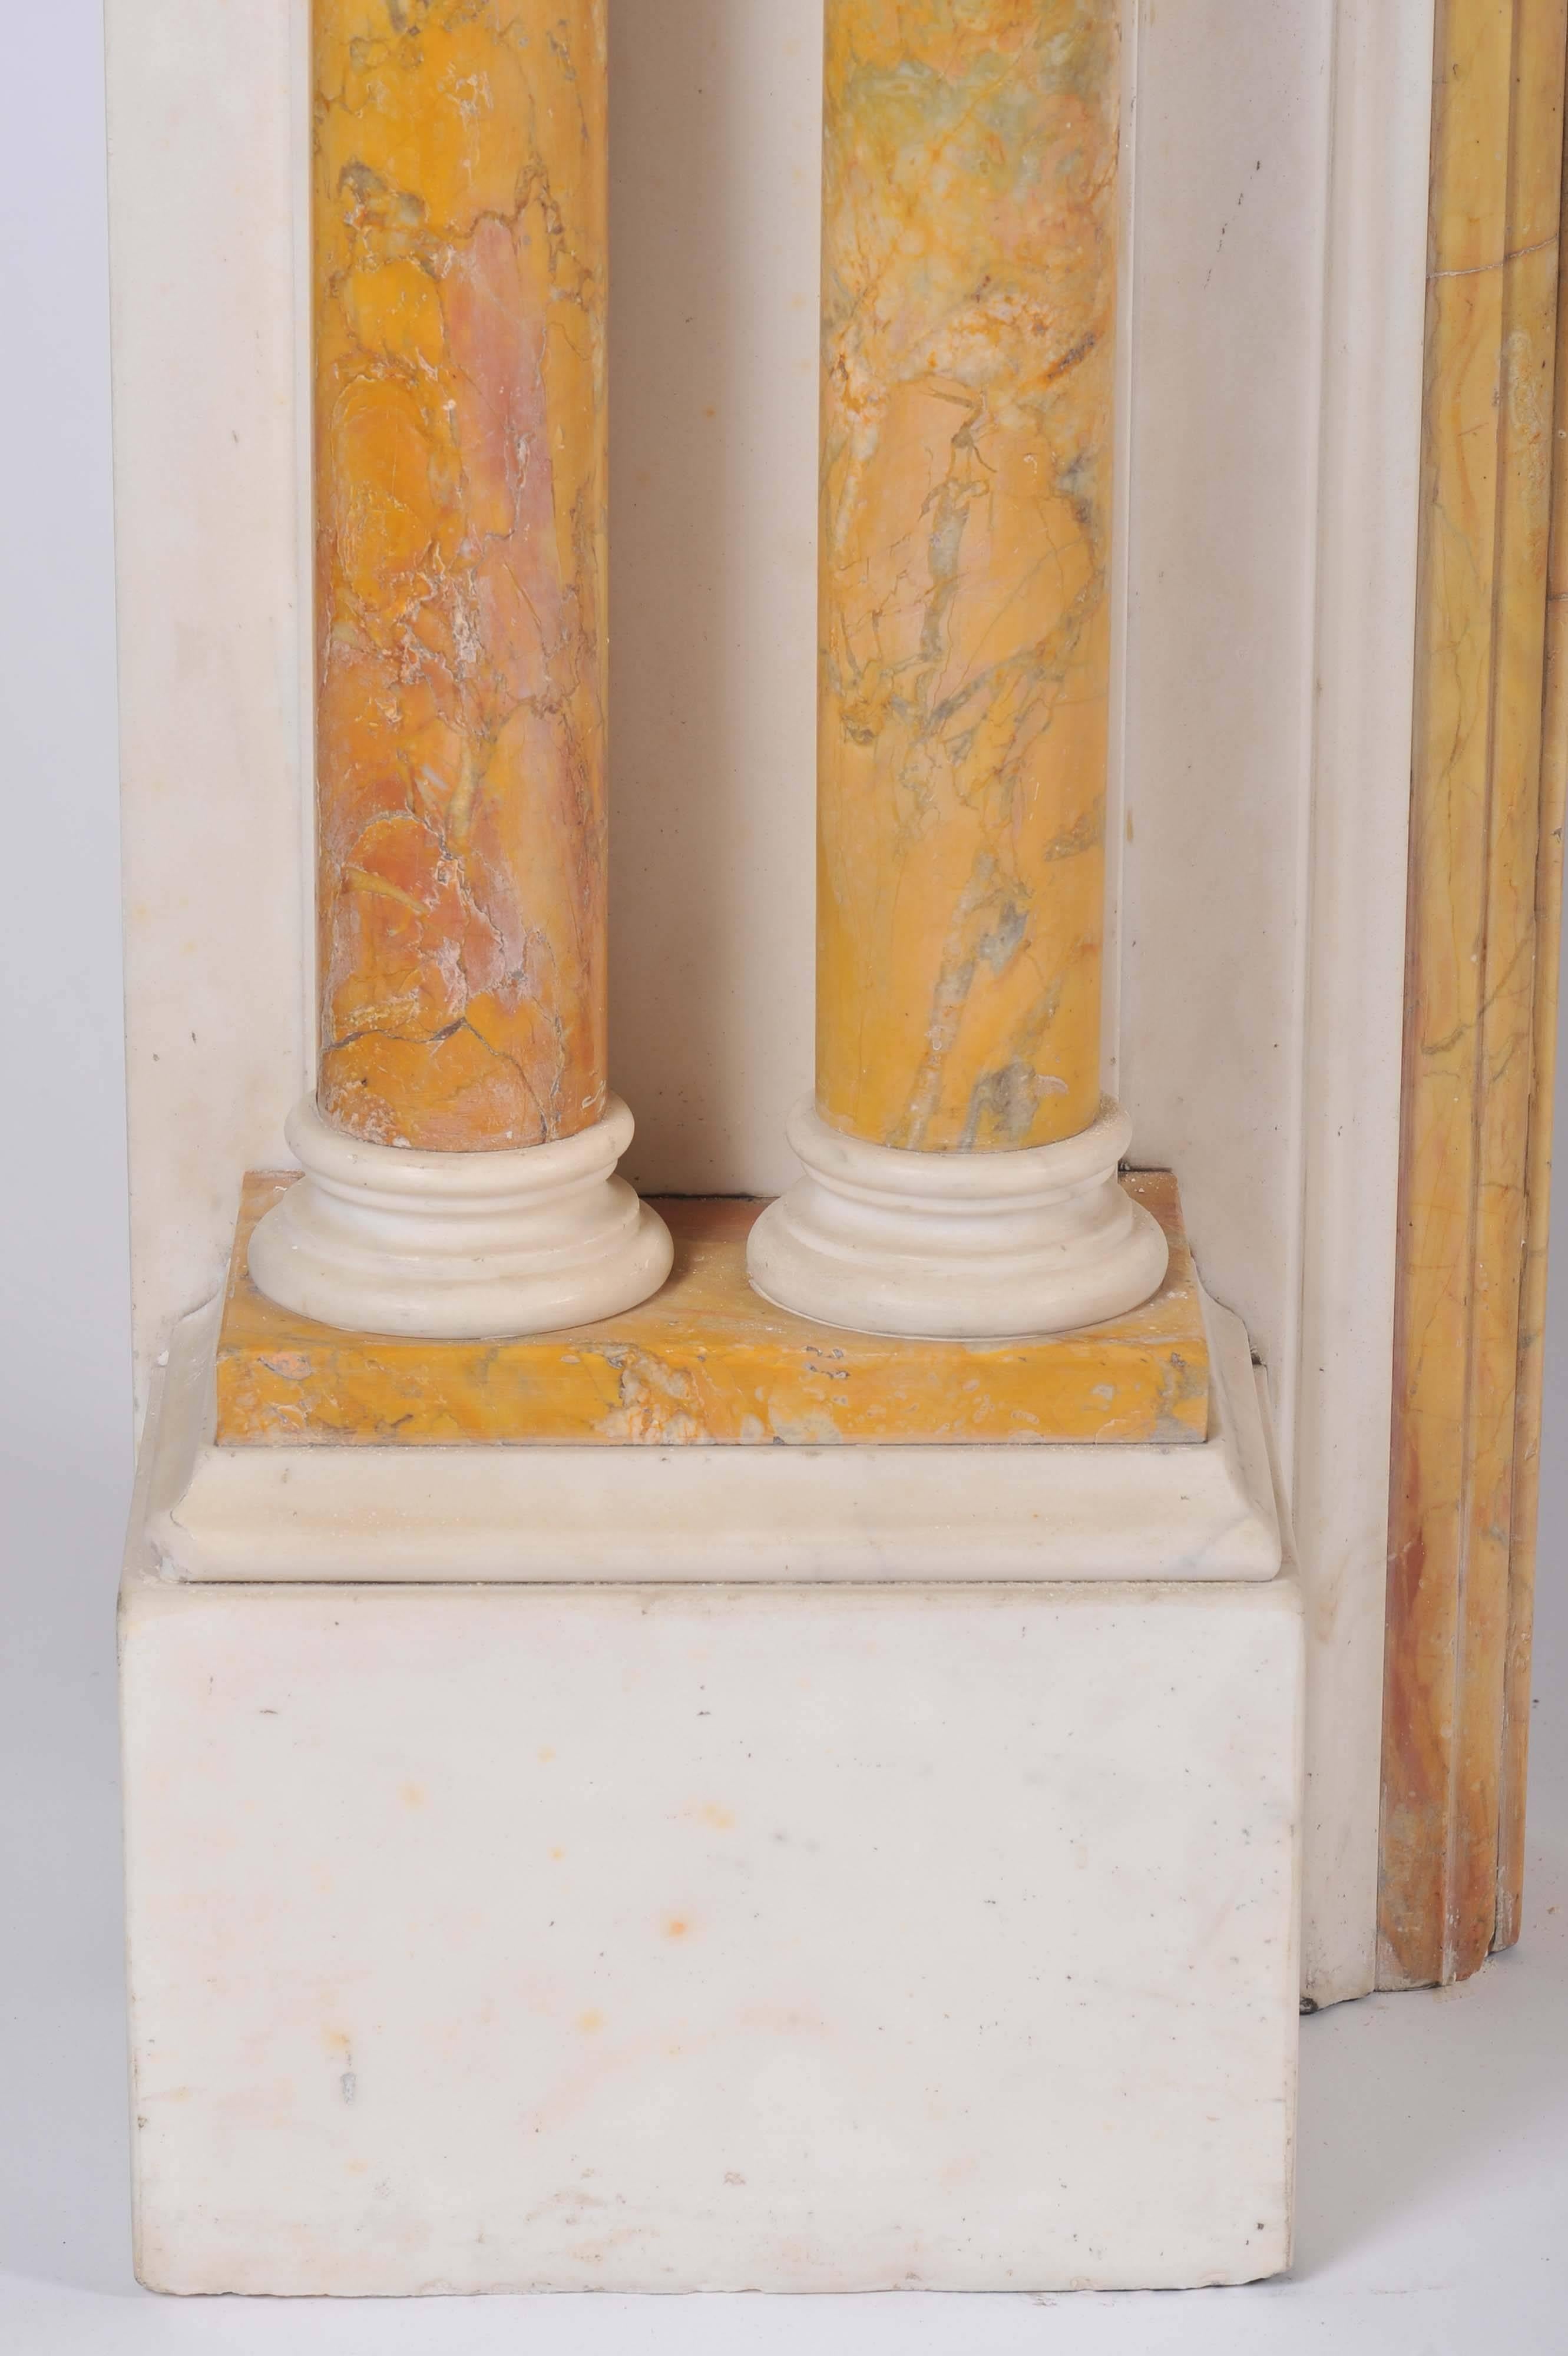 Grand Antique English 19th Century Statuary and Sienna Marble Fireplace Surround For Sale 2